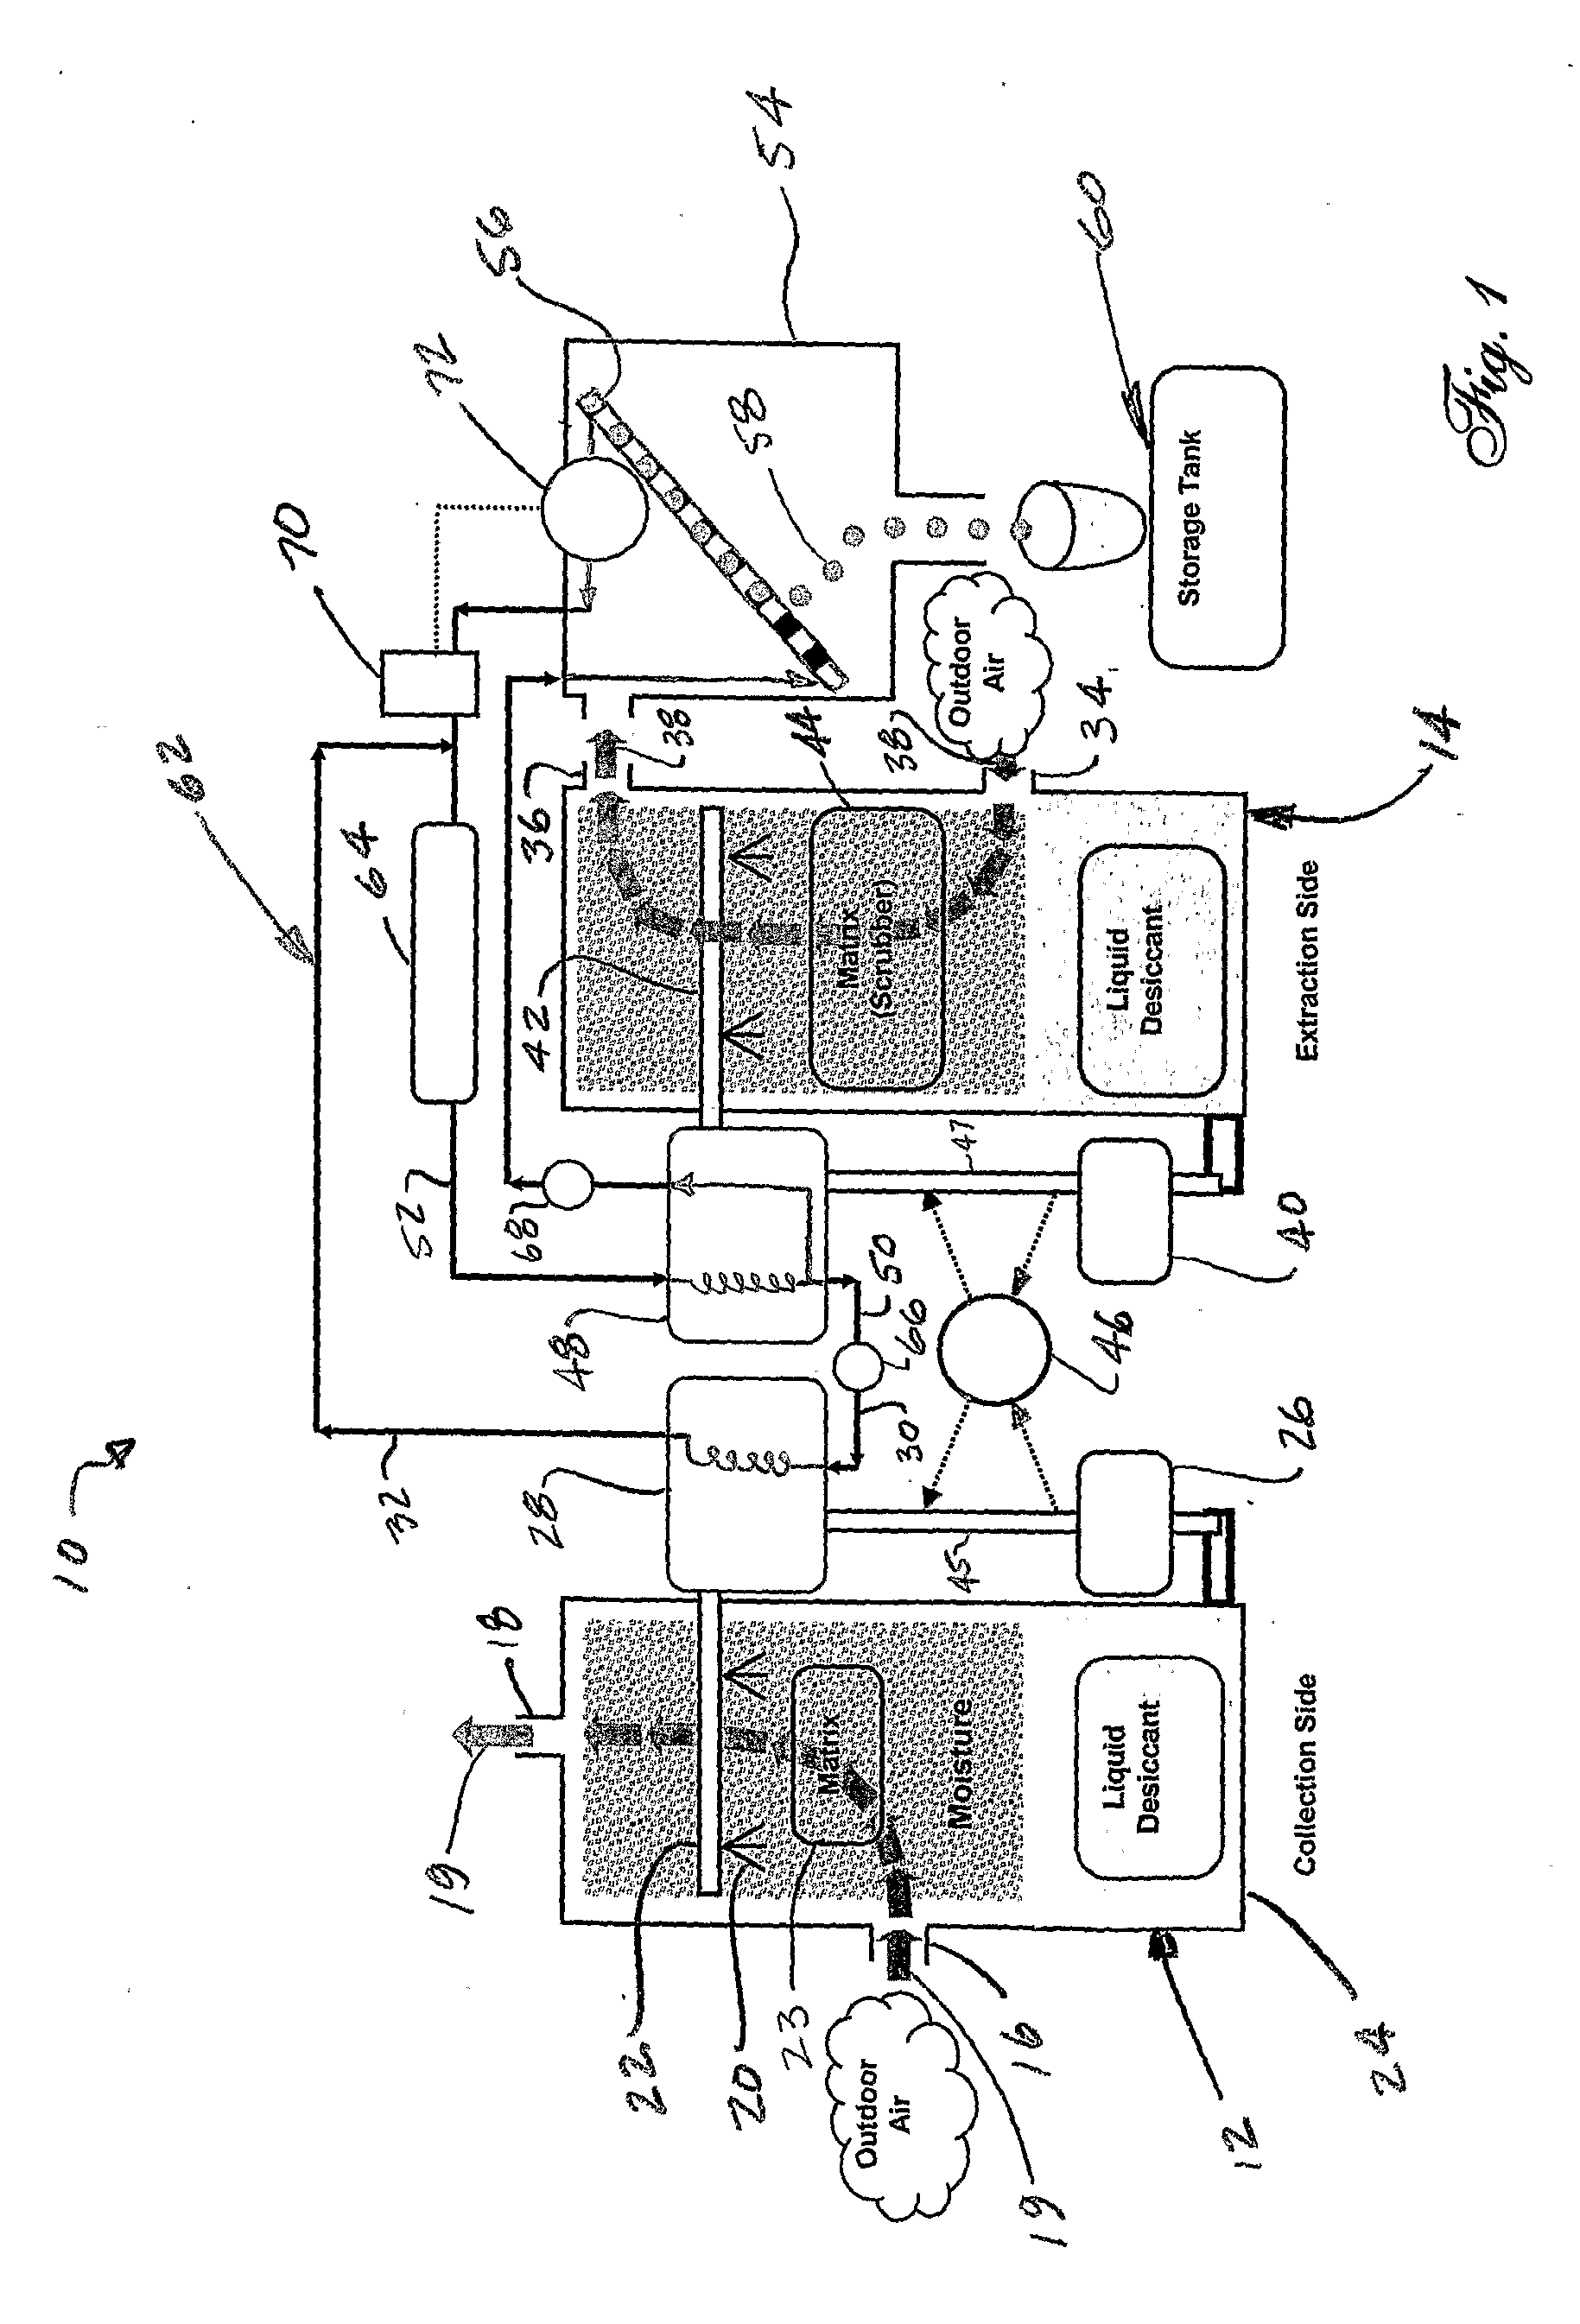 System and Method for Managing Water Content in a Fluid